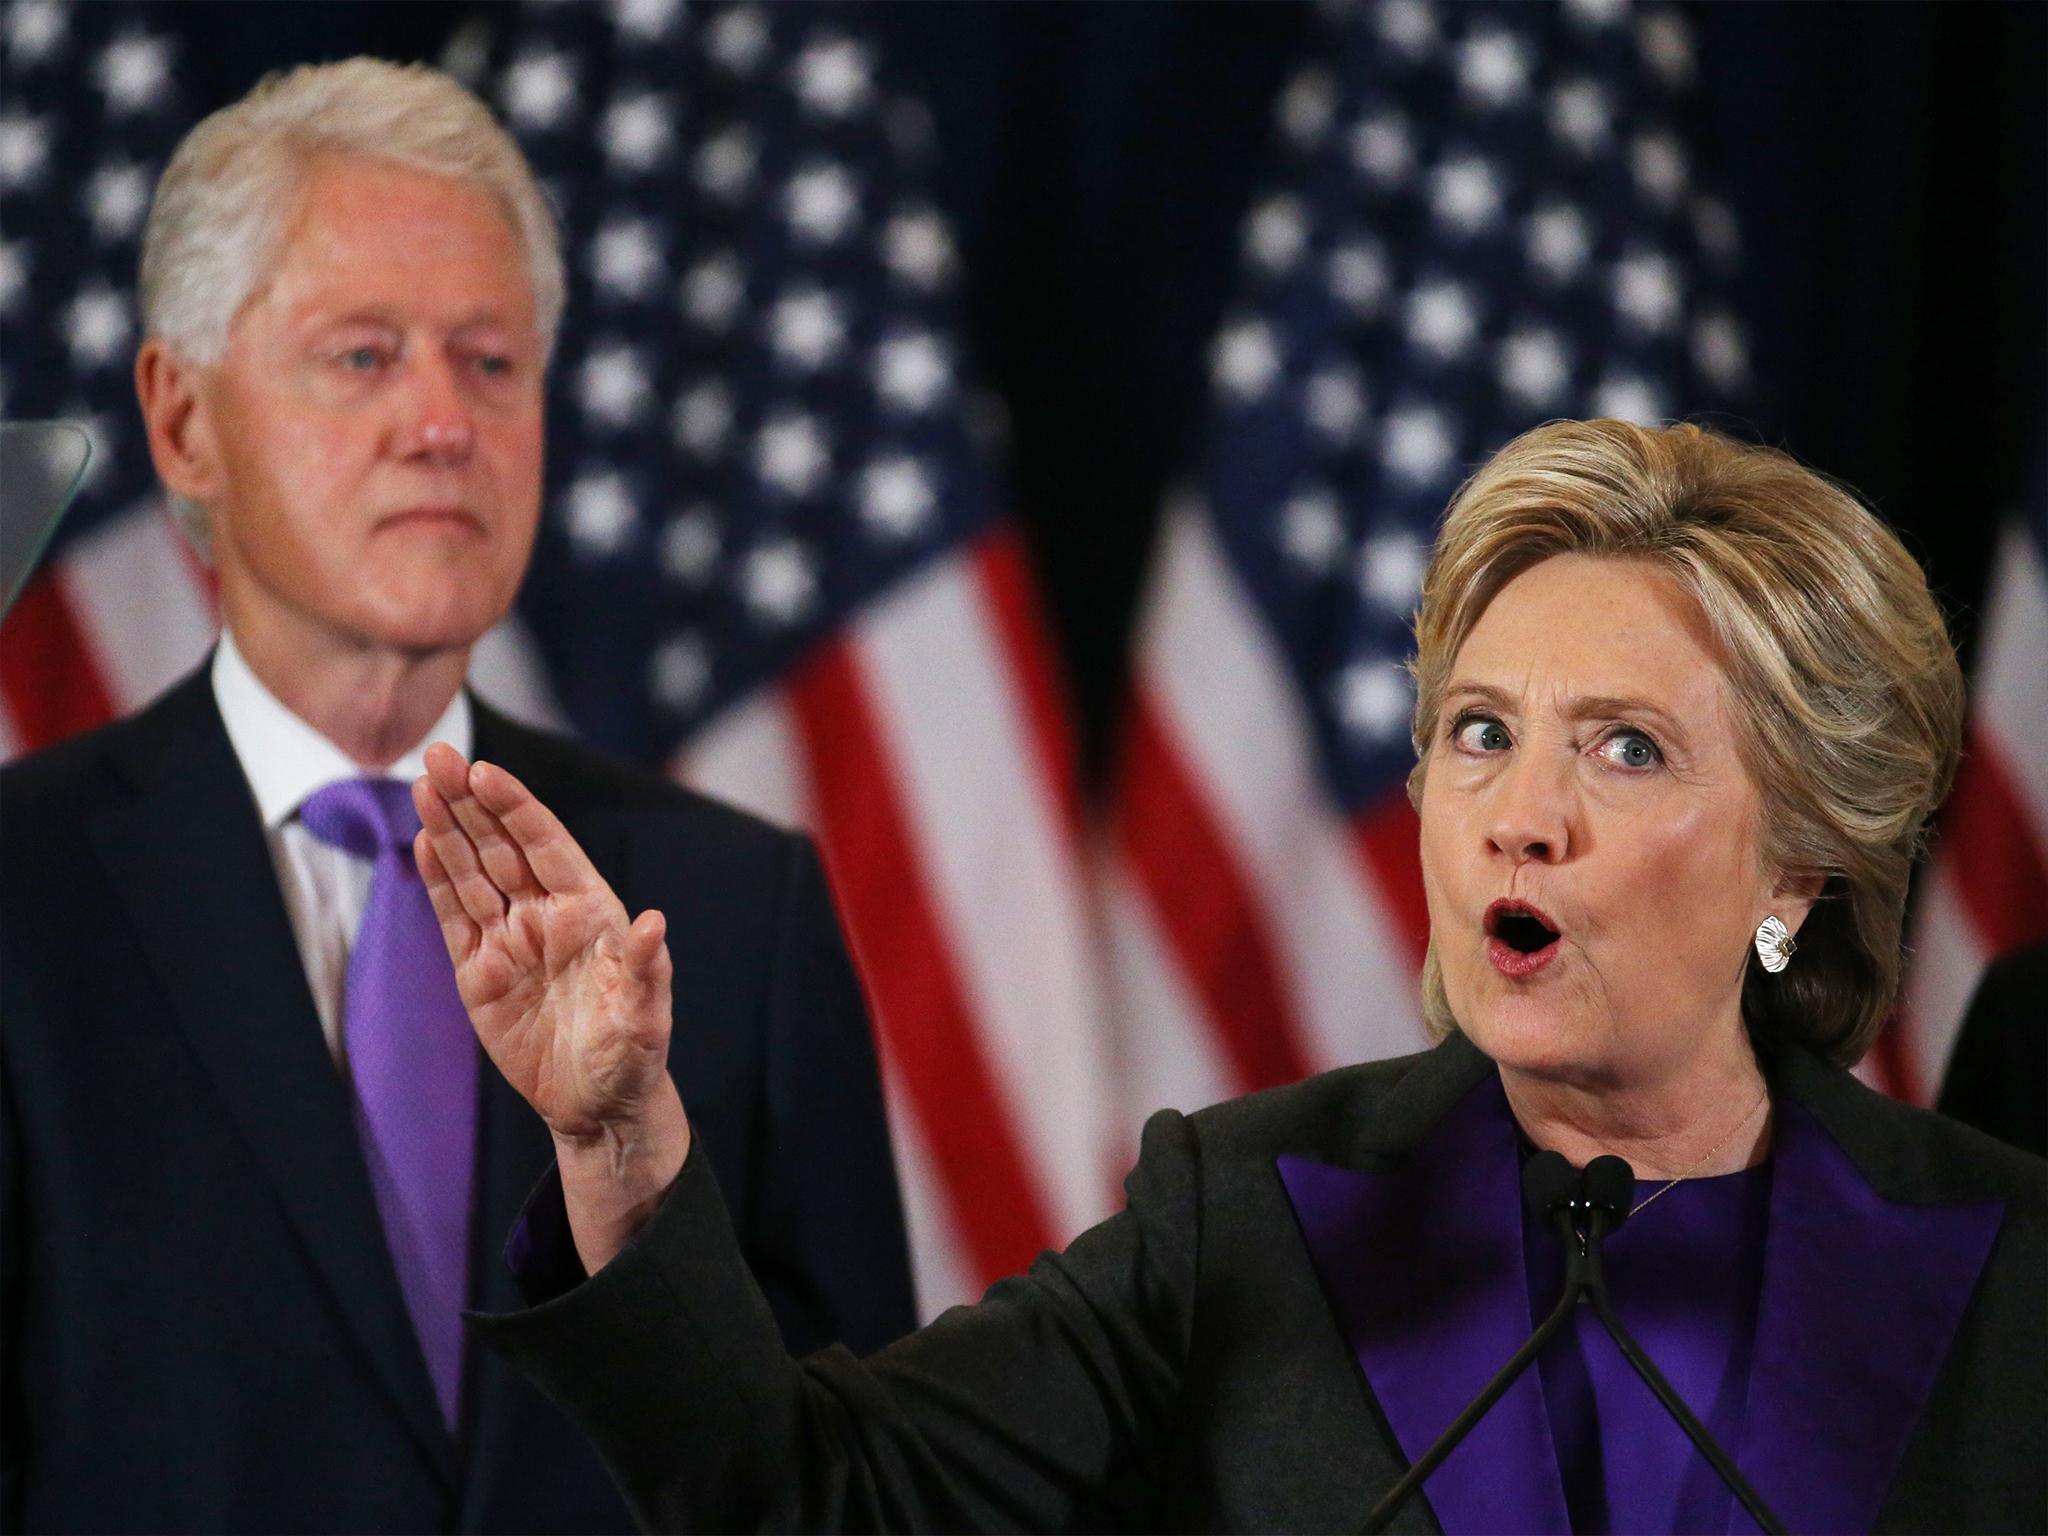 Hillary Clinton has partly blamed foreign interference for the failure of her presidential bid